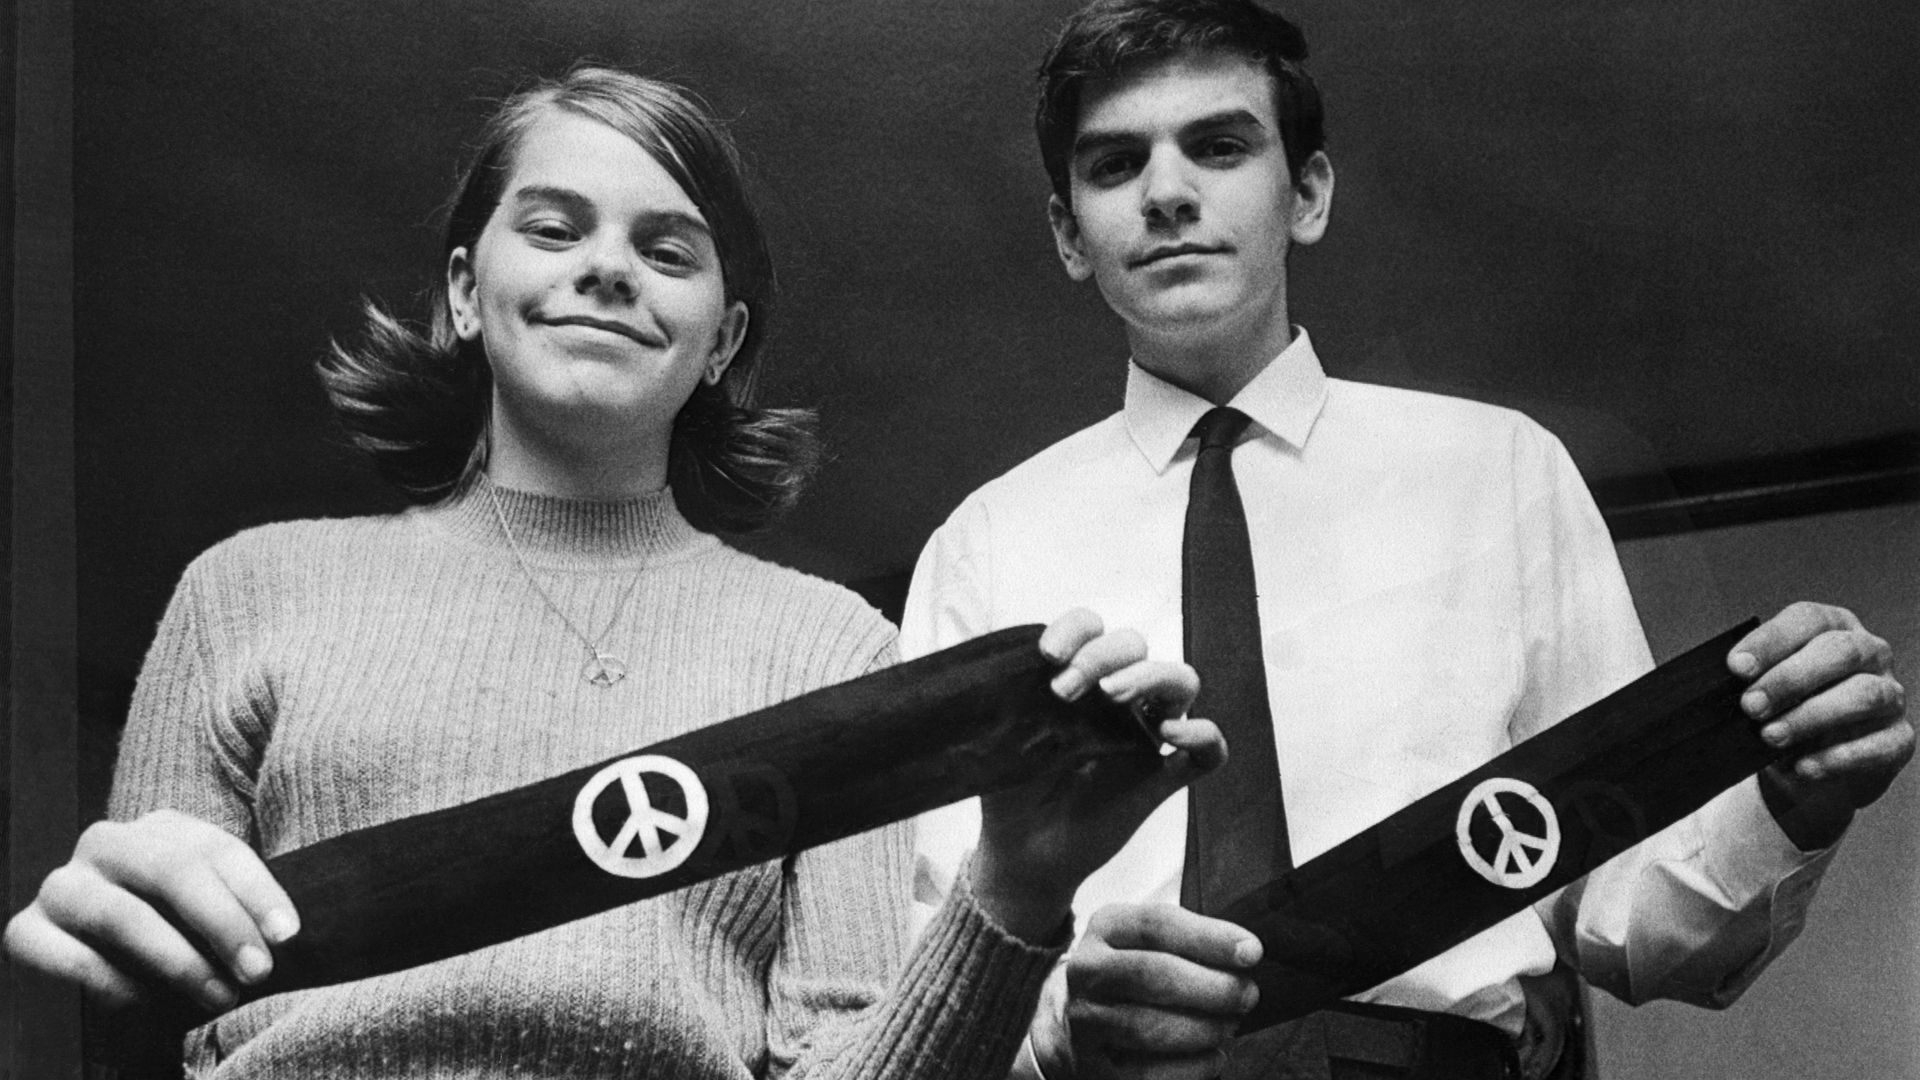 A photo of John and Mary Beth Tinker.